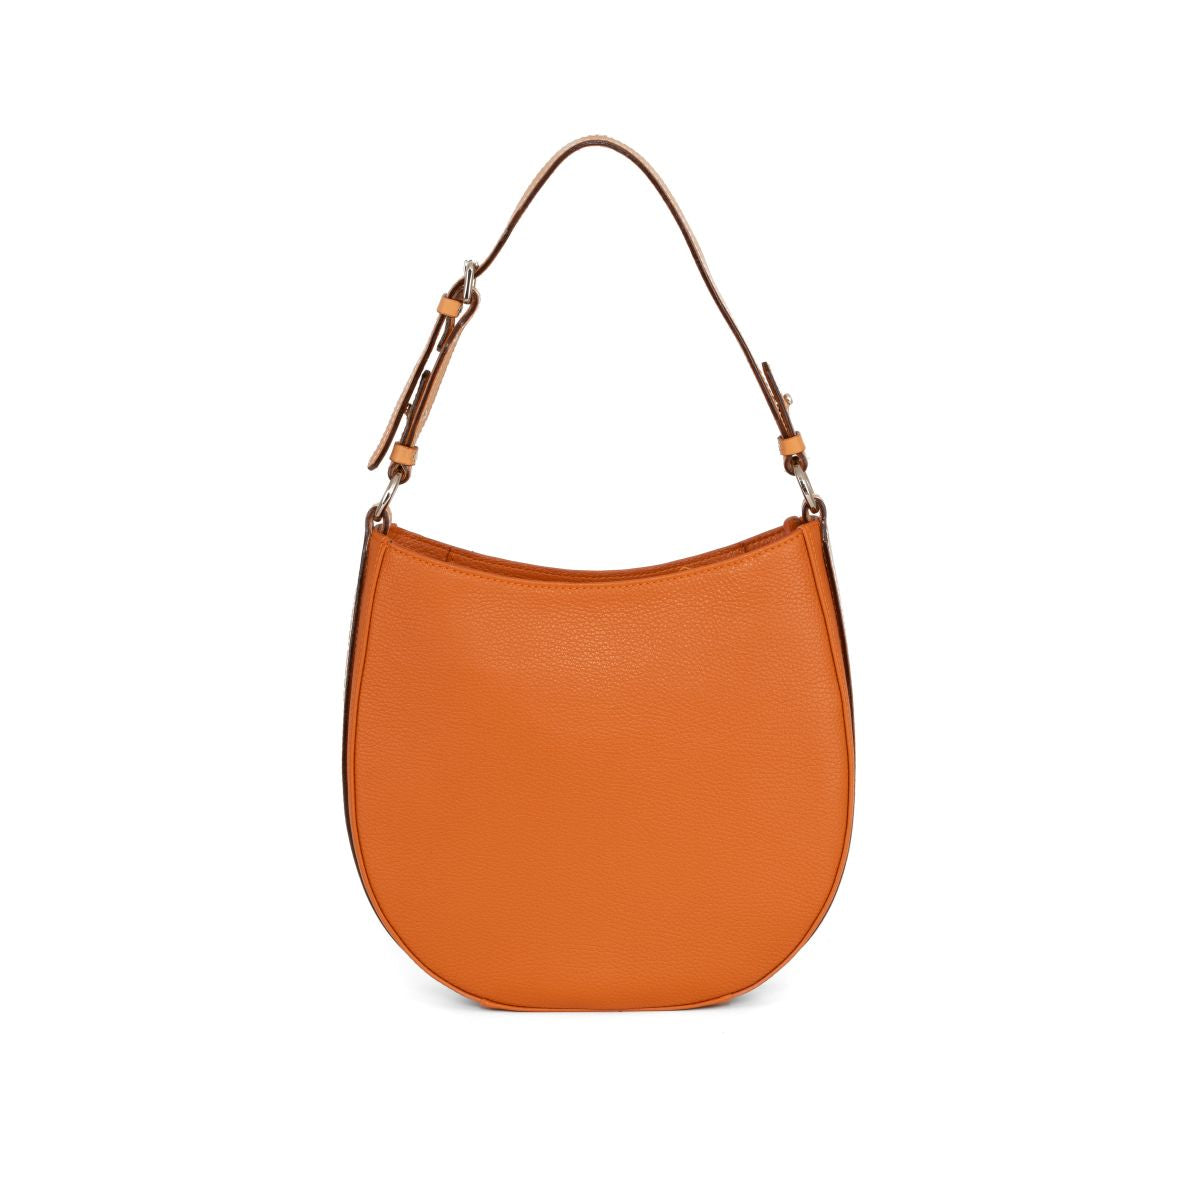 KALLY by Gianni Conti - Made-to-Order Vegetable-Tanned Leather Shoulder Bag